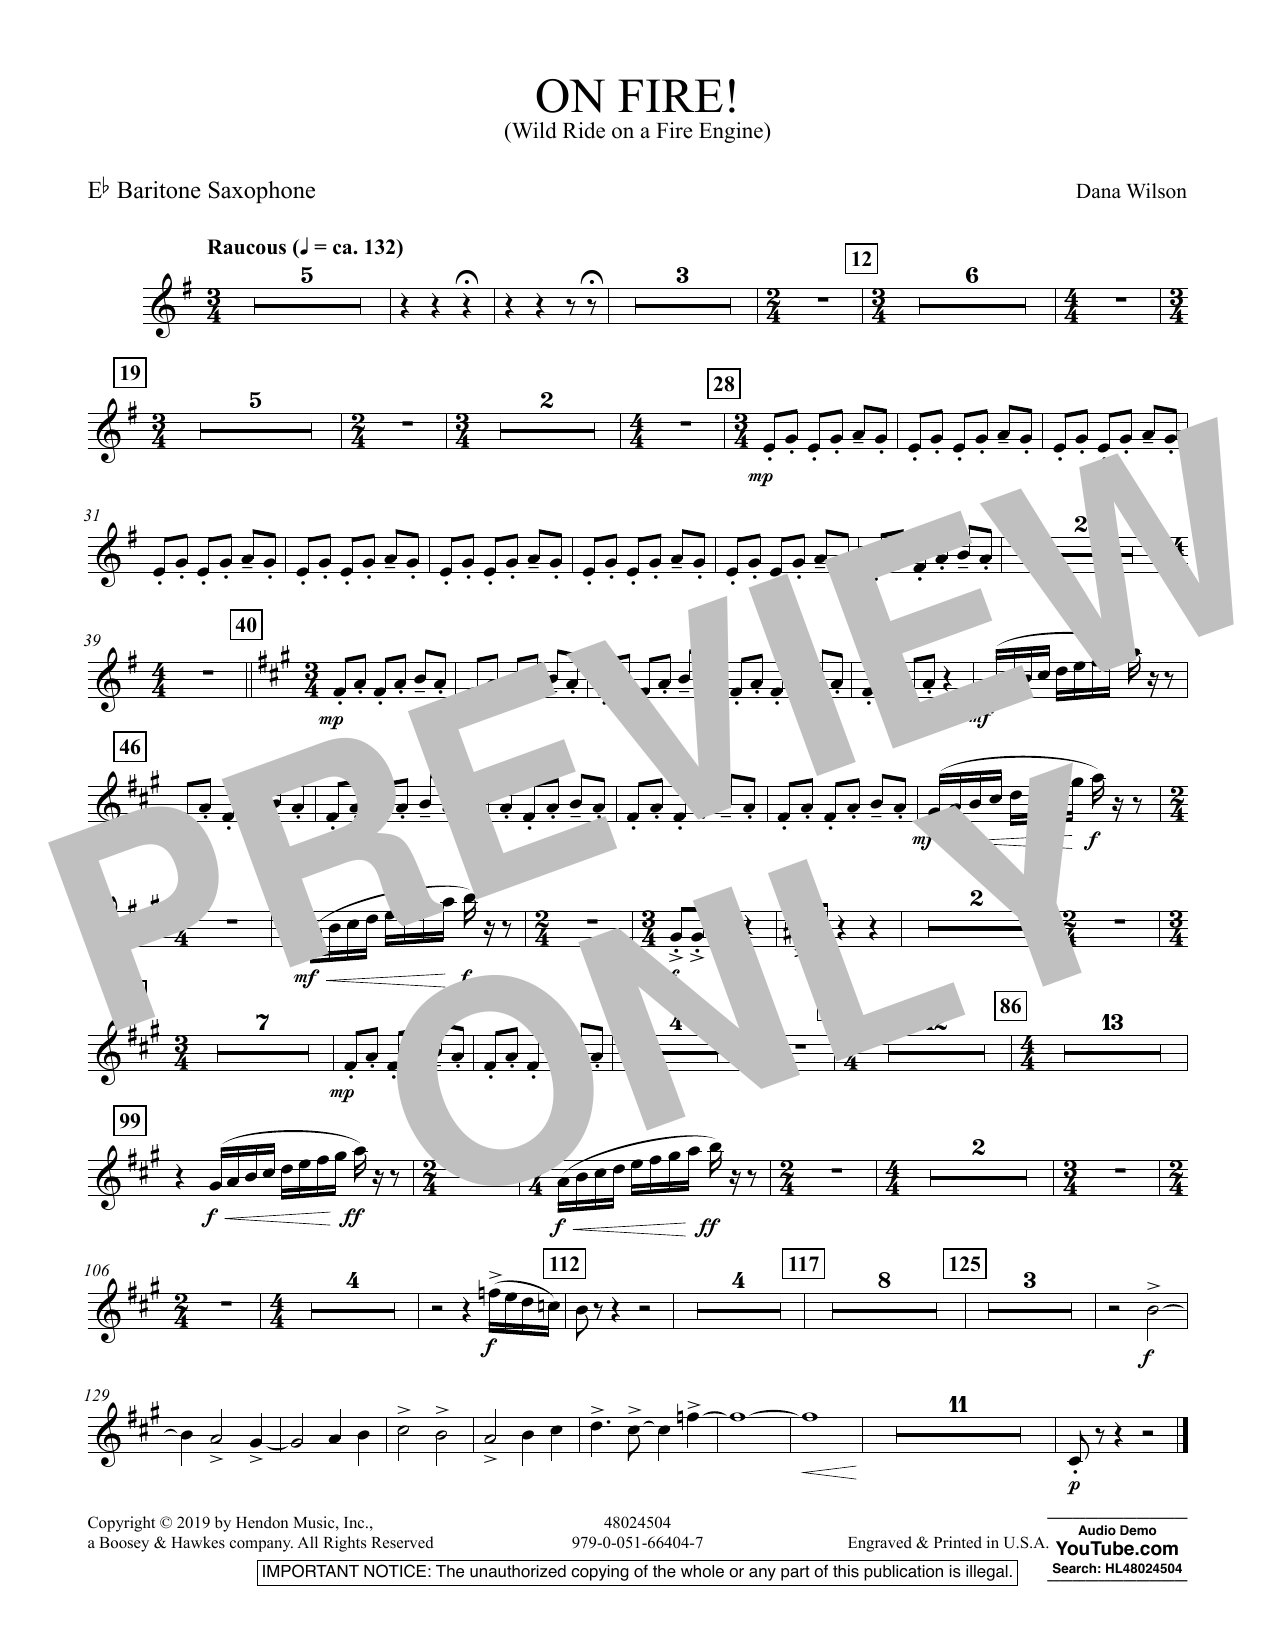 Dana Wilson On Fire! (Wild Ride on a Fire Engine) - Eb Baritone Saxophone sheet music preview music notes and score for Concert Band including 1 page(s)